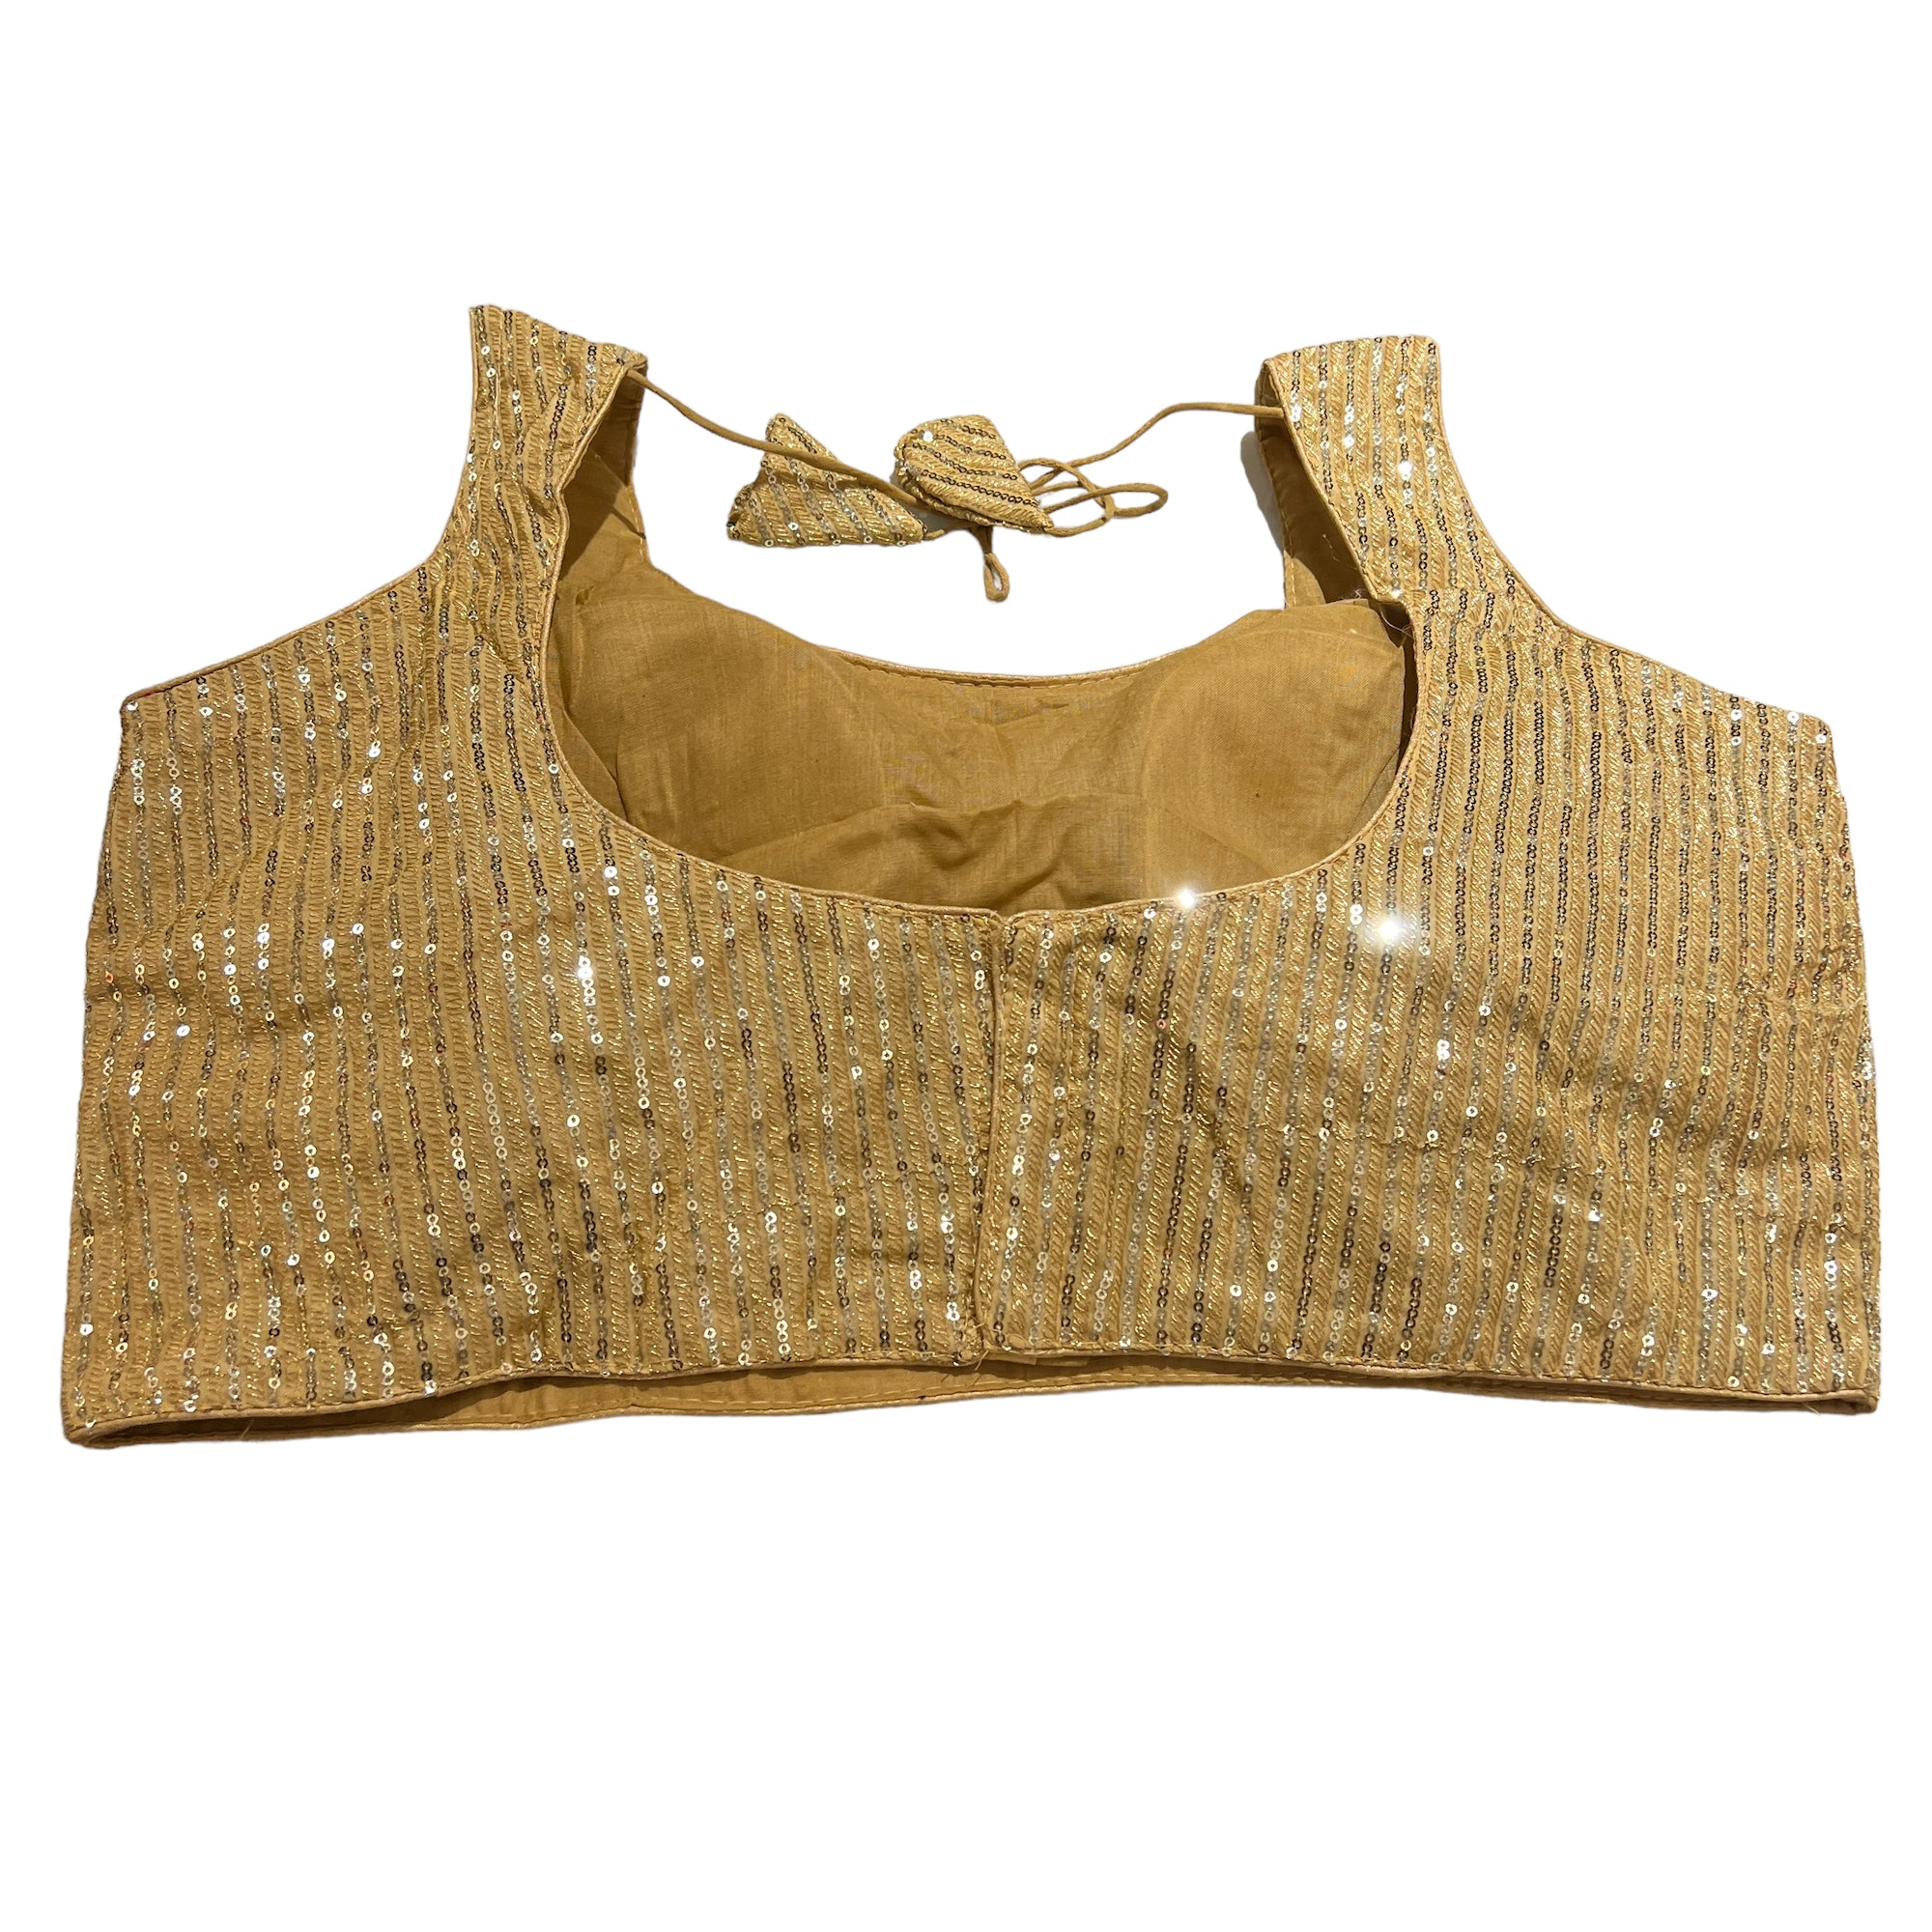 Q Gold Sequin Choli Blouse-Size 42 - Vintage India NYC